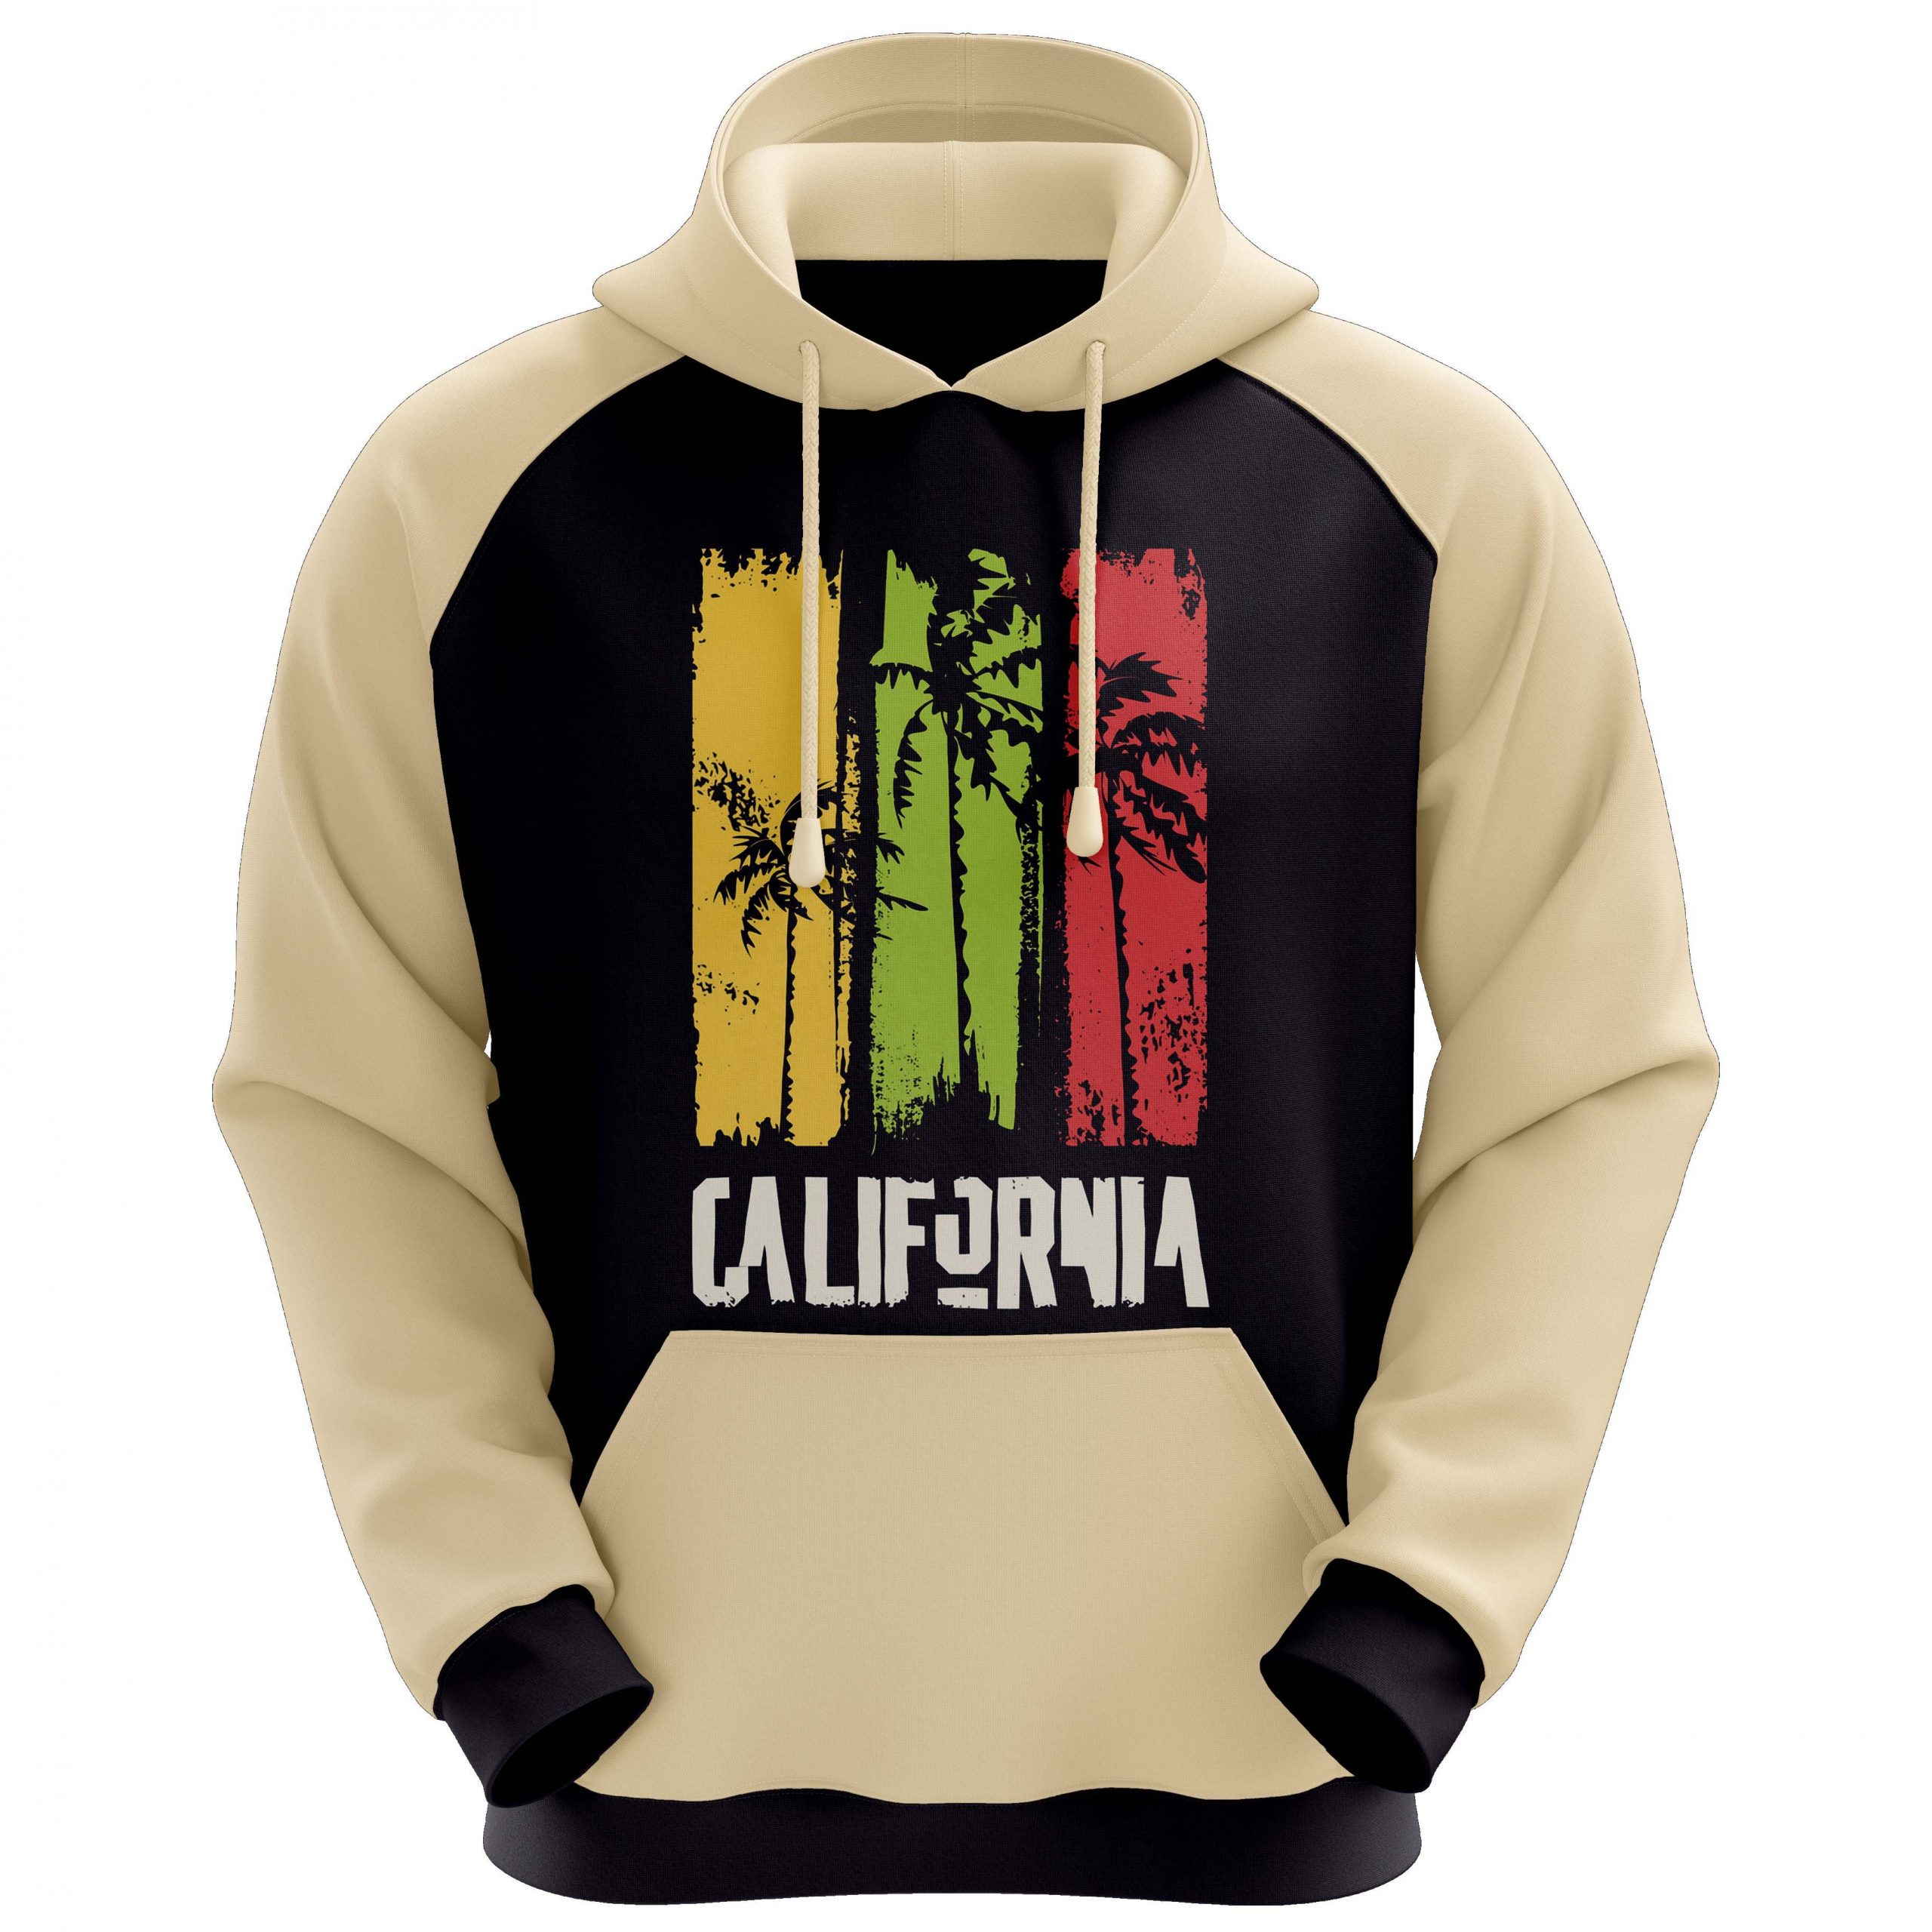 sublimation hoodies for men/wholesale sublimation printing